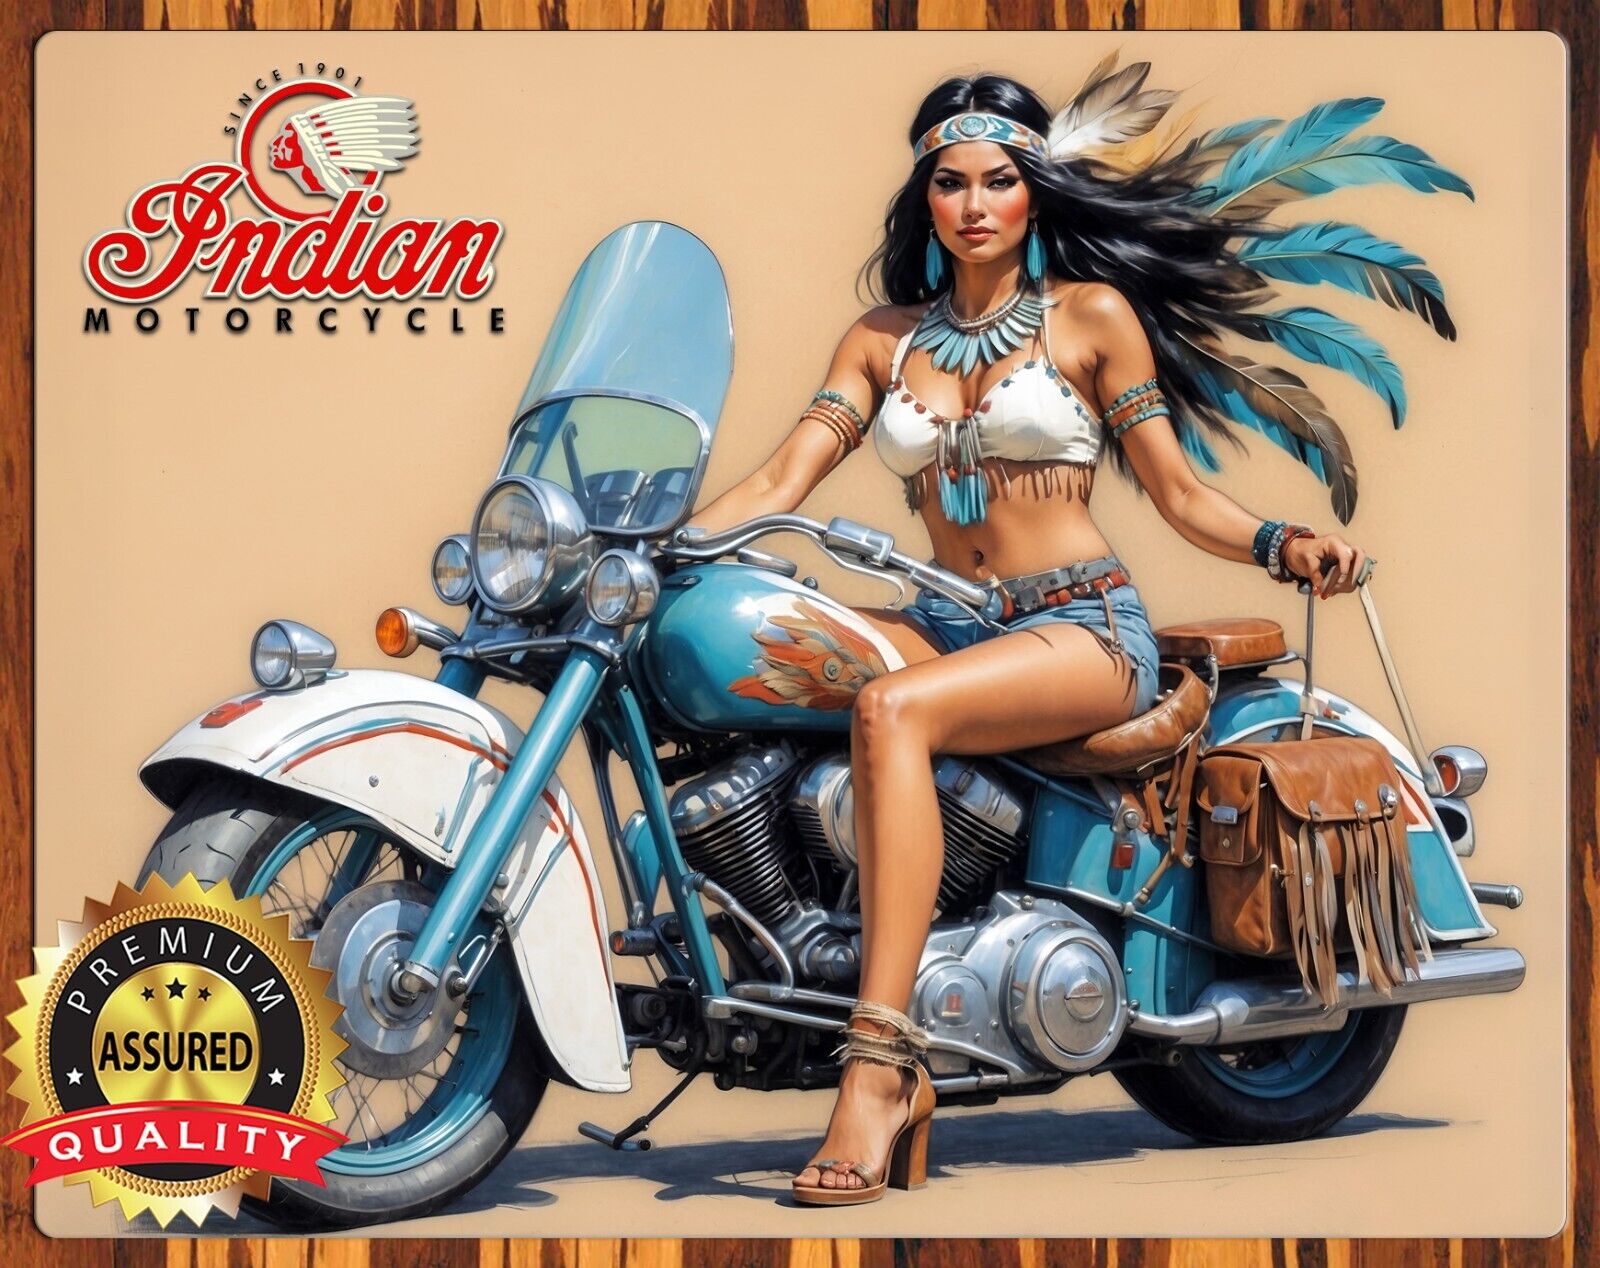 Indian Motorcycle - Painting Since 1901 - Metal Sign 11 x 14